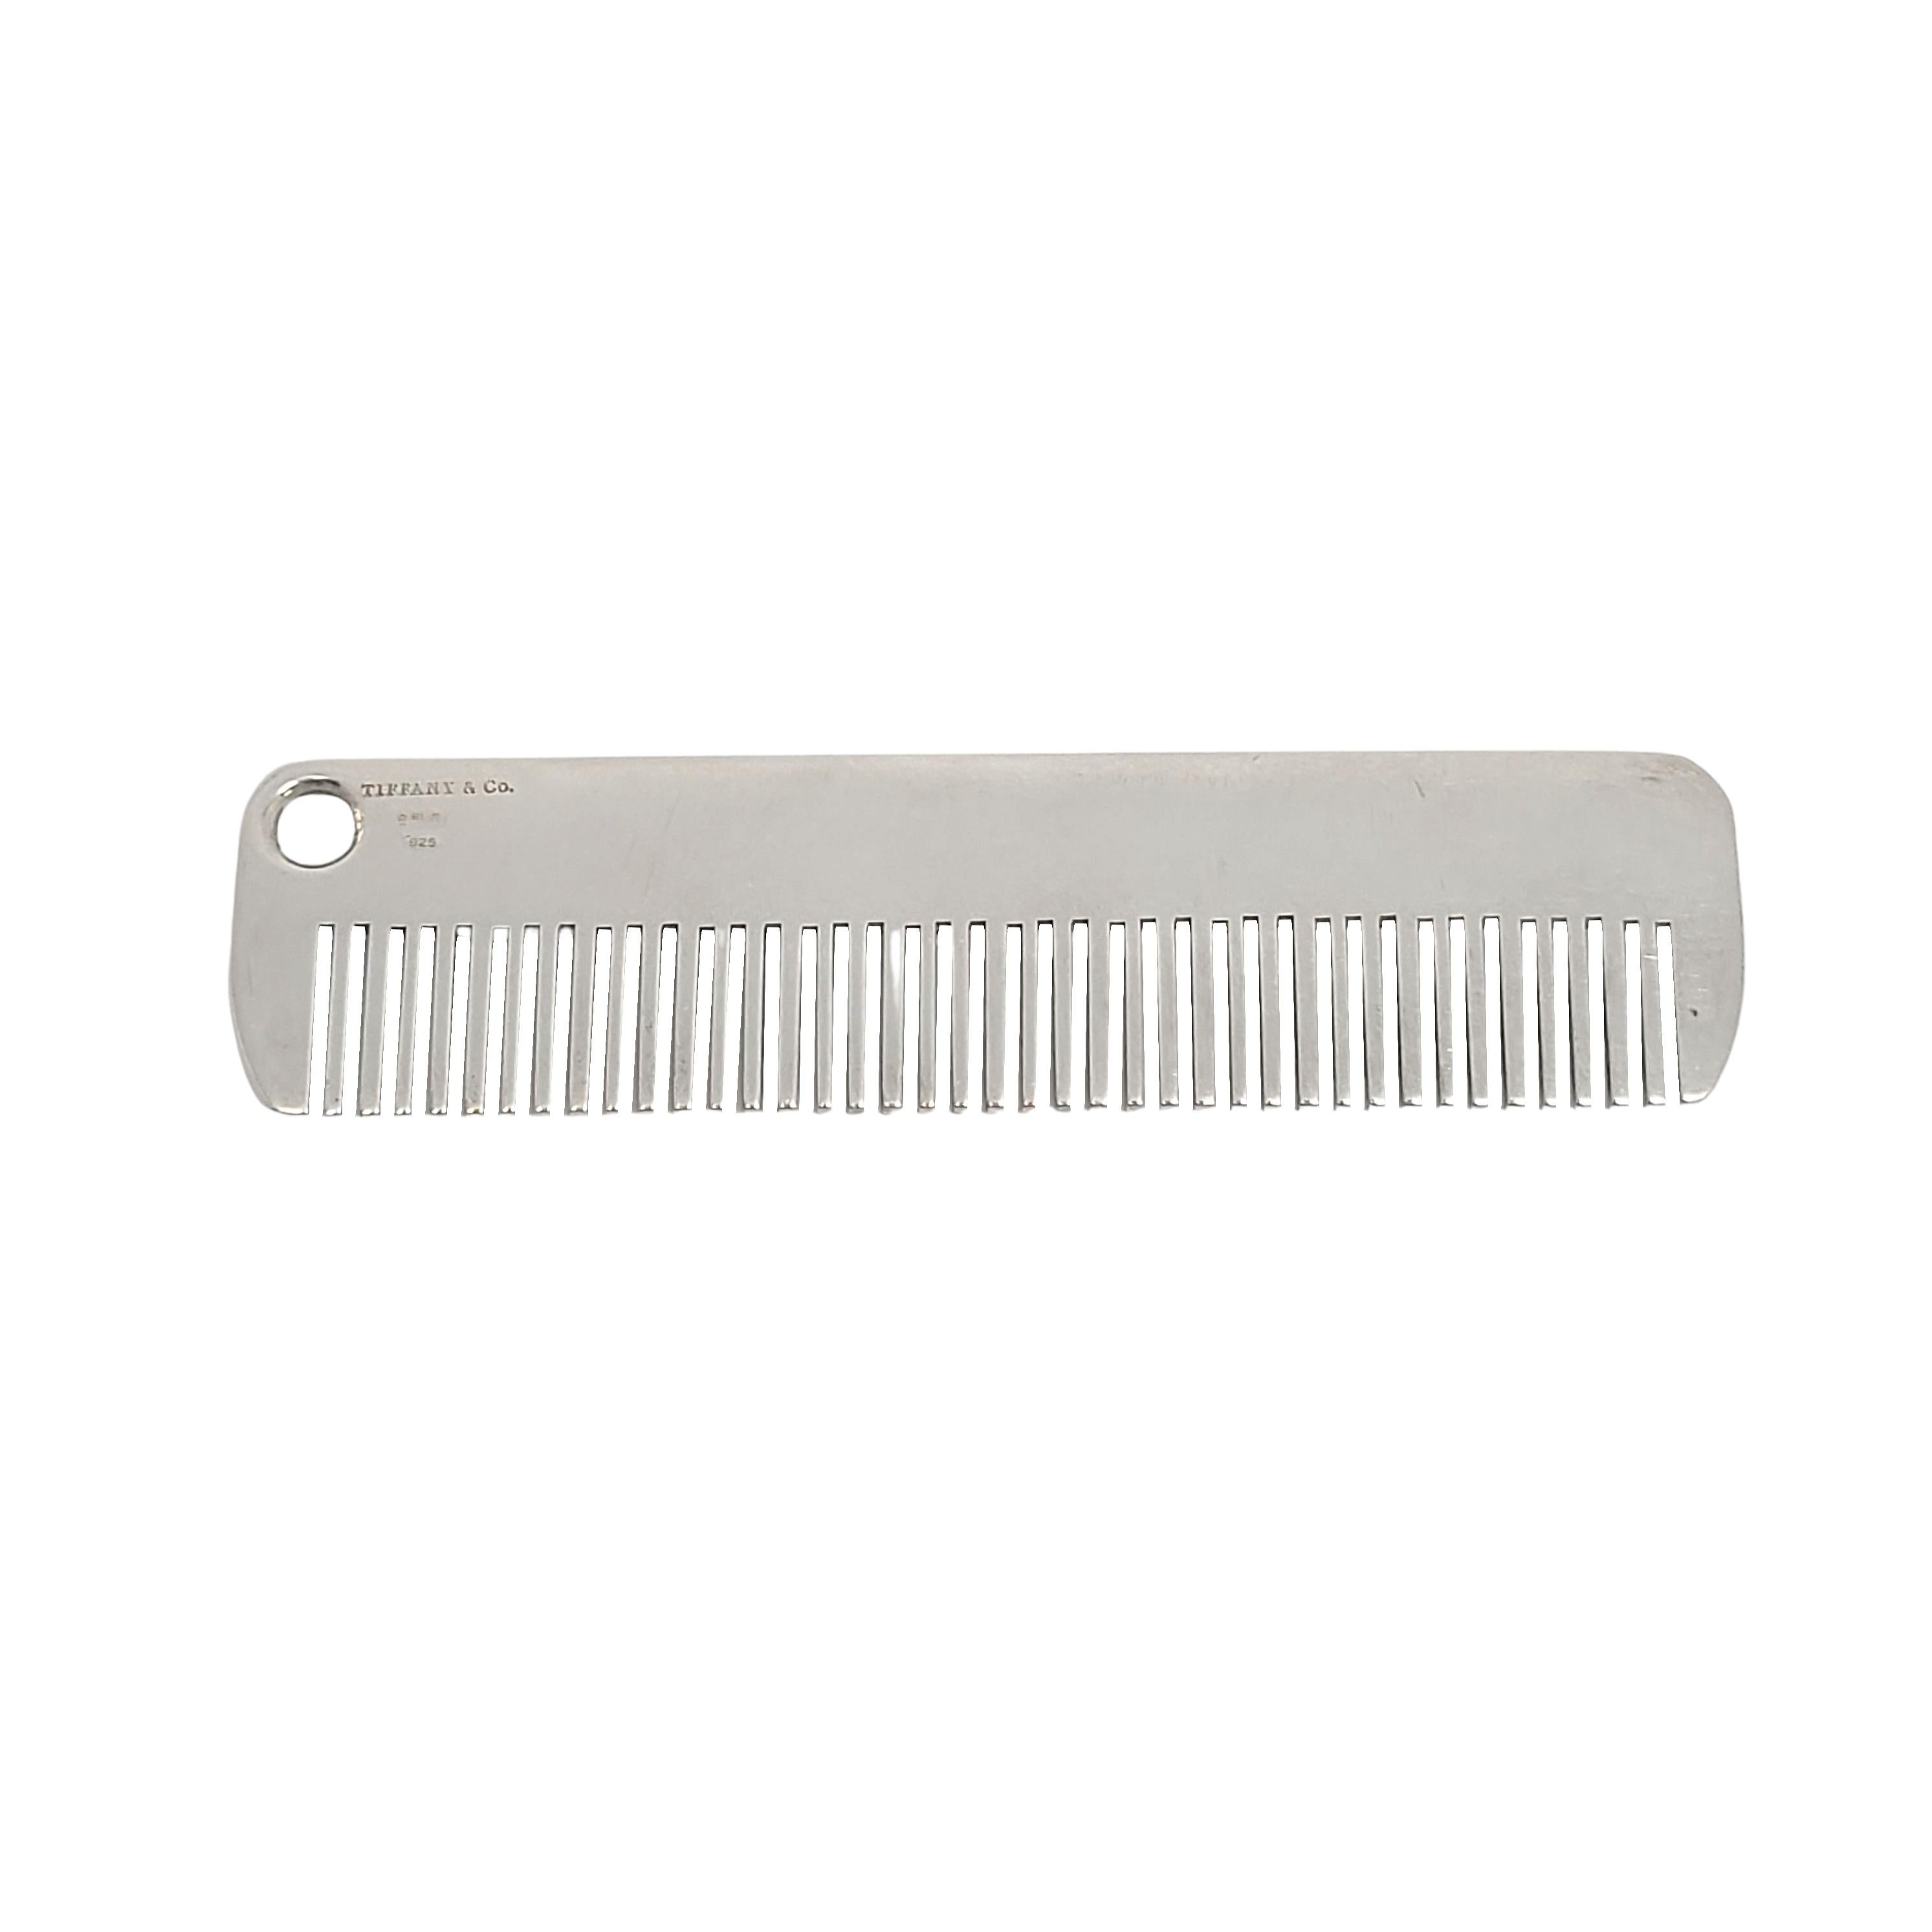 Sterling silver baby comb by Tiffany & Co.

No monogram or engraving.

A simple and timeless classic polished design by Tiffany & Co. Tiffany pouch and box not included.

Measures approx 3 1/8